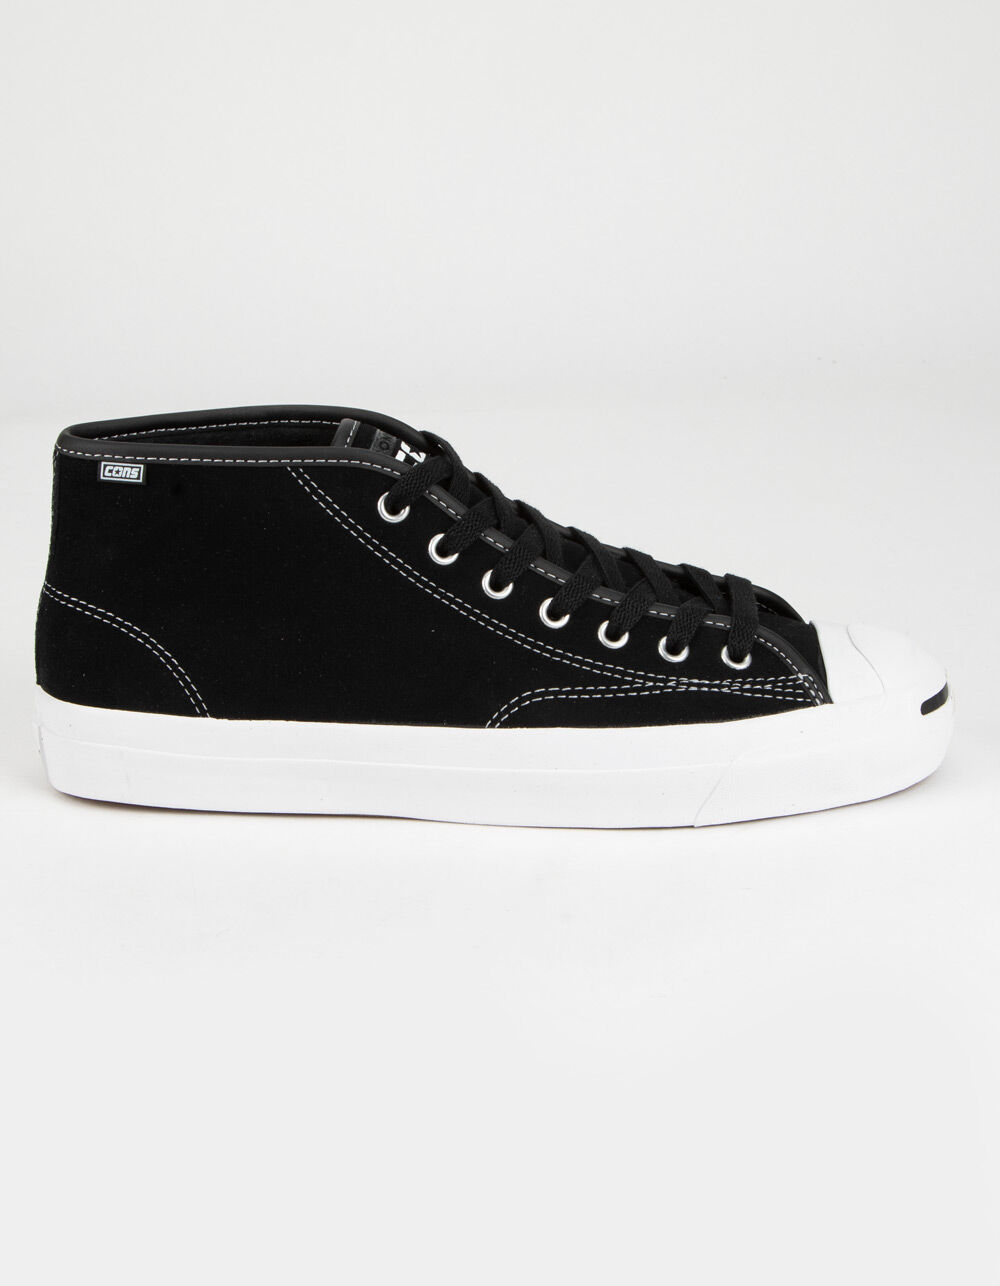 CONVERSE Jack Purcell Mid Mens Black & White Shoes - BLACK/WHITE | Tillys